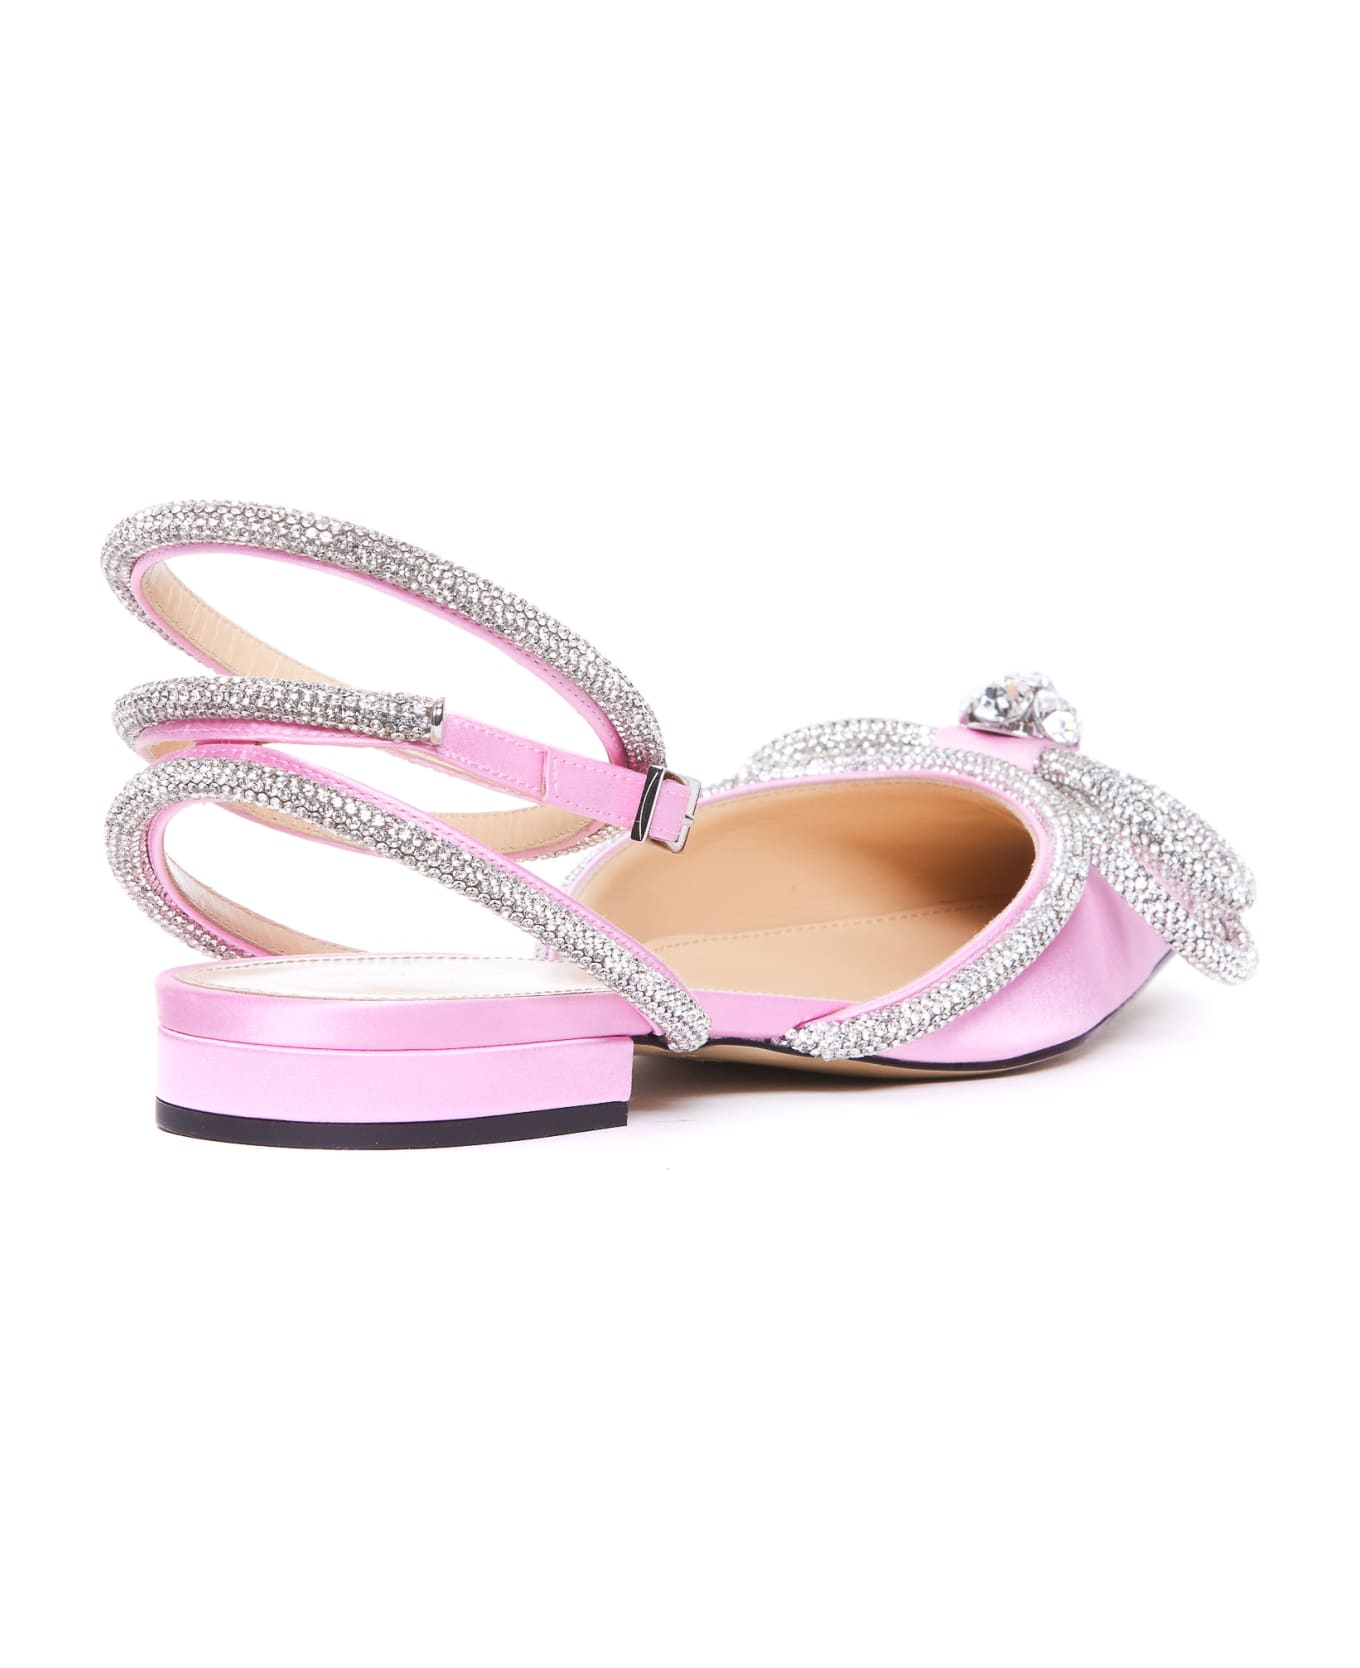 Mach & Mach Double Bow Flats - Pink